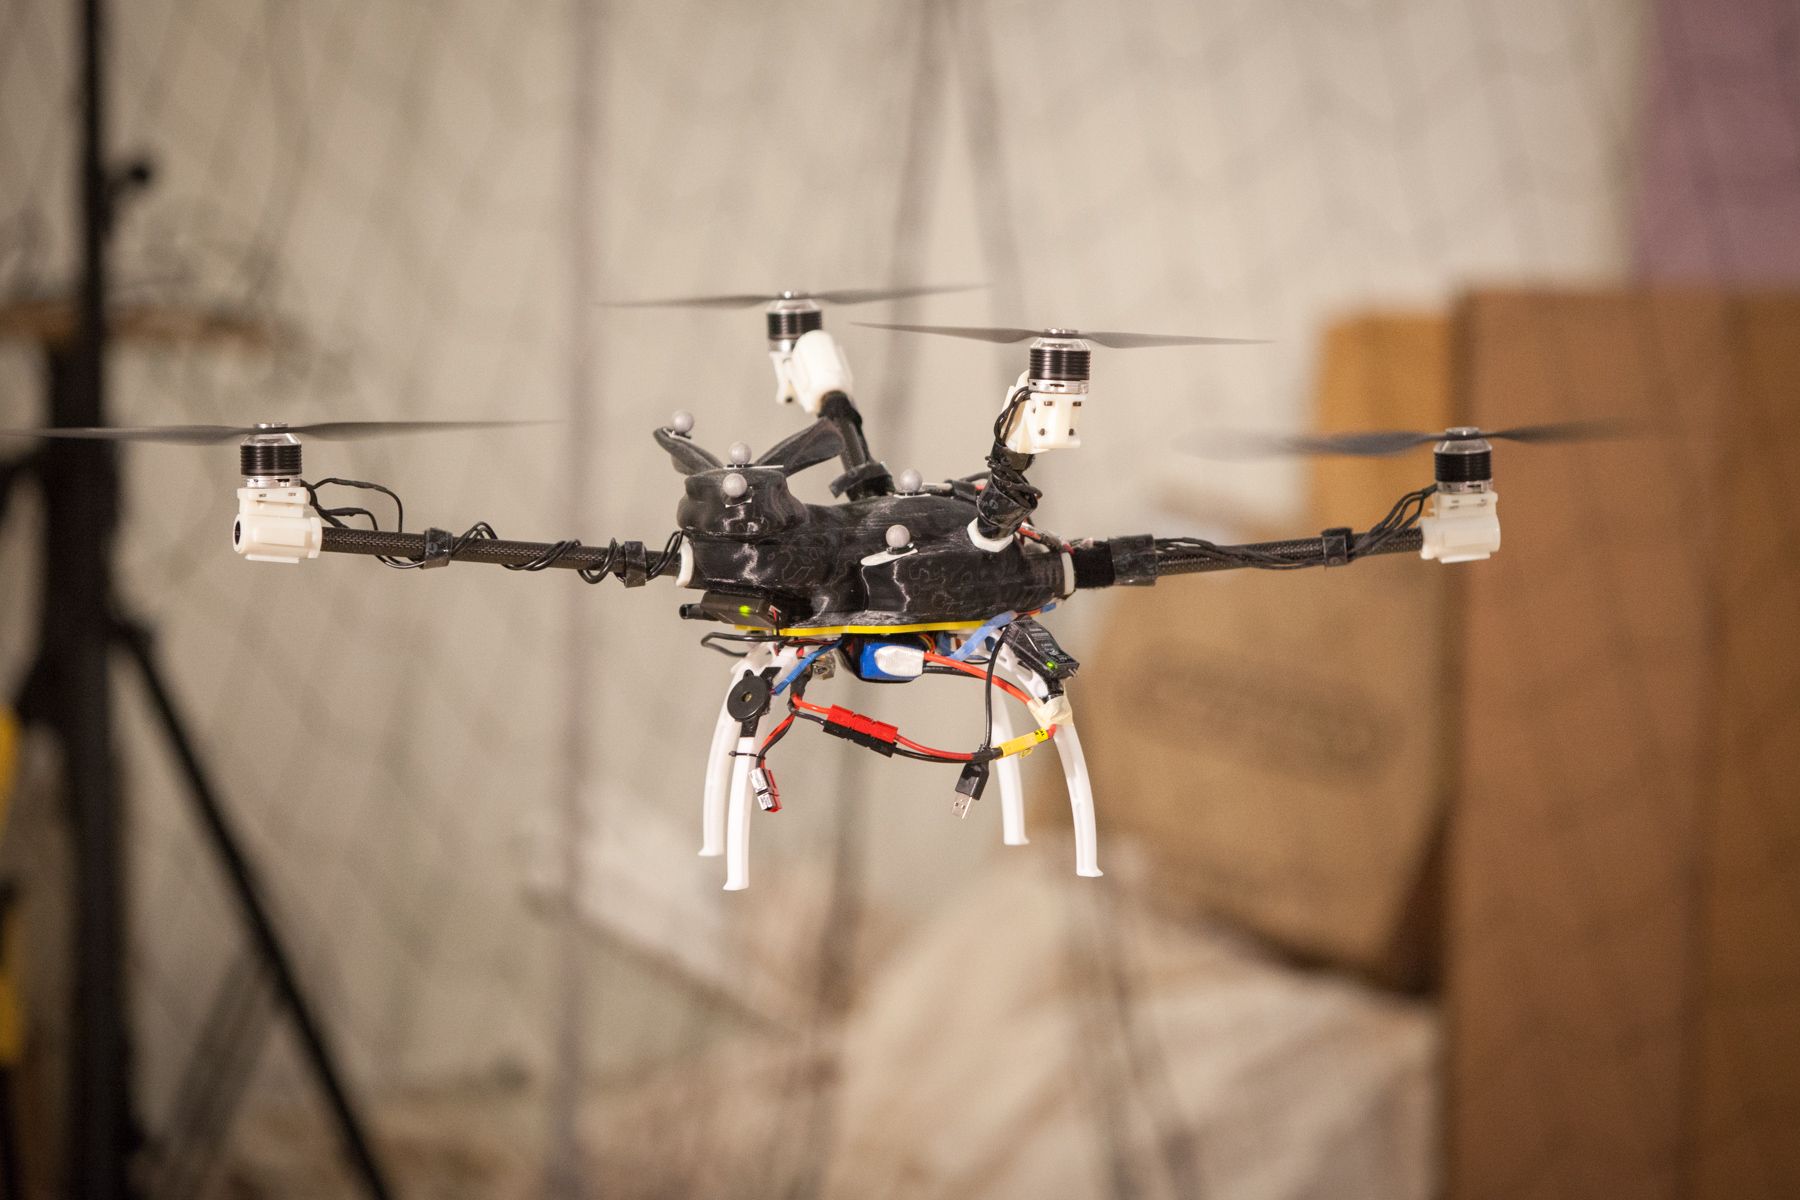 Design your own drone | News | Massachusetts of Technology